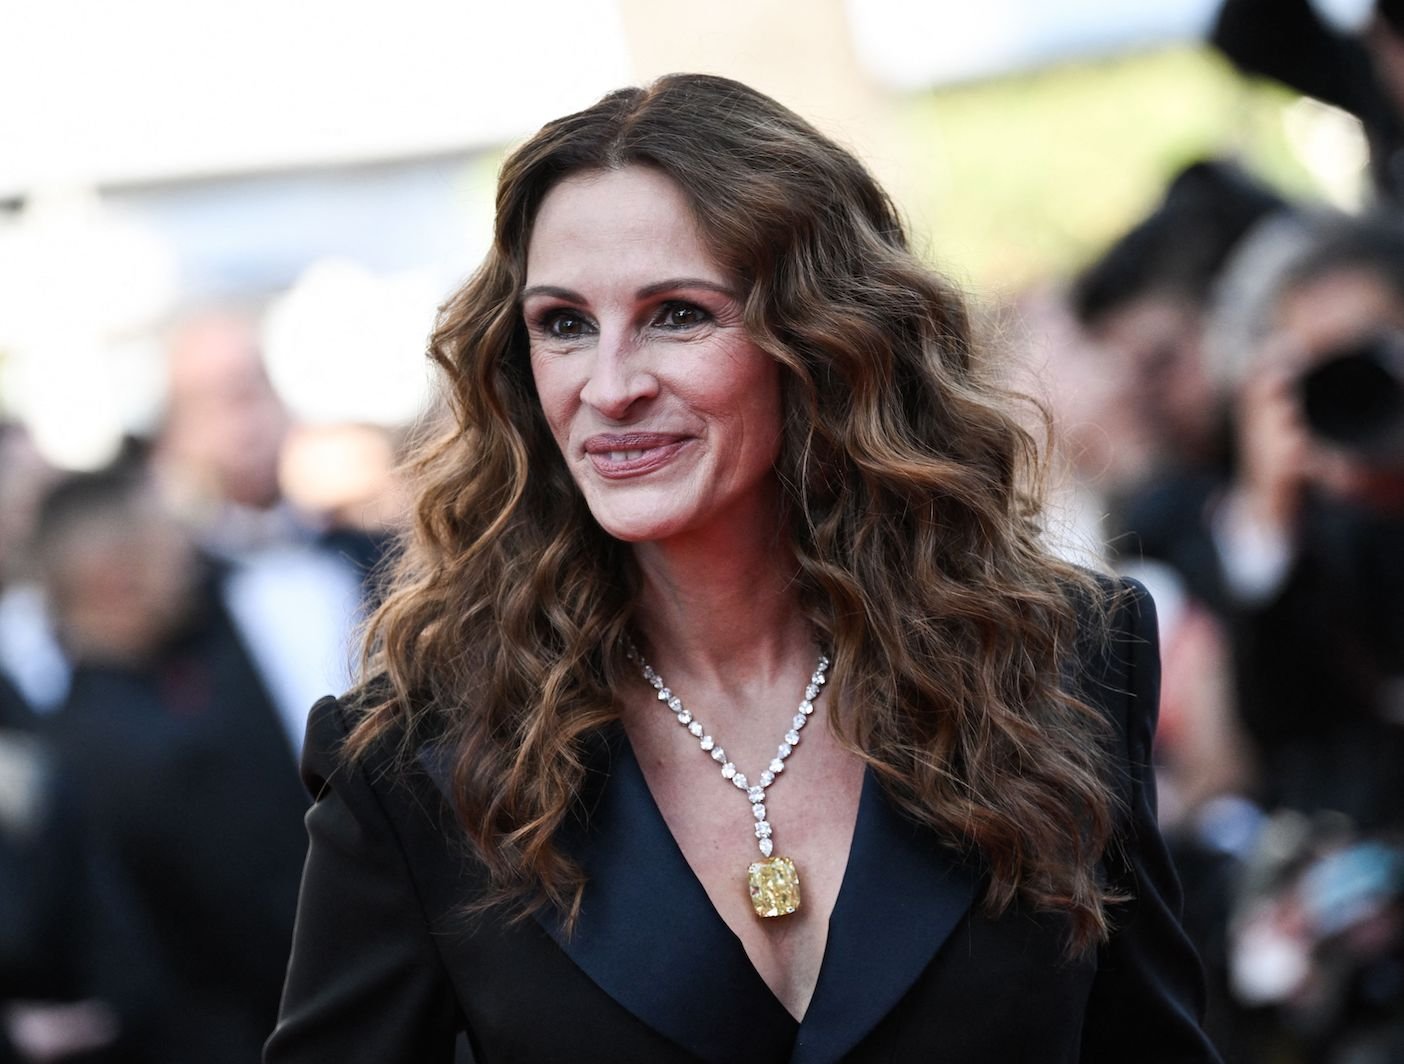 Sketchy Insider Claims Julia Roberts’ Marriage Apparently On ‘Life Support’ After Solo Appearance